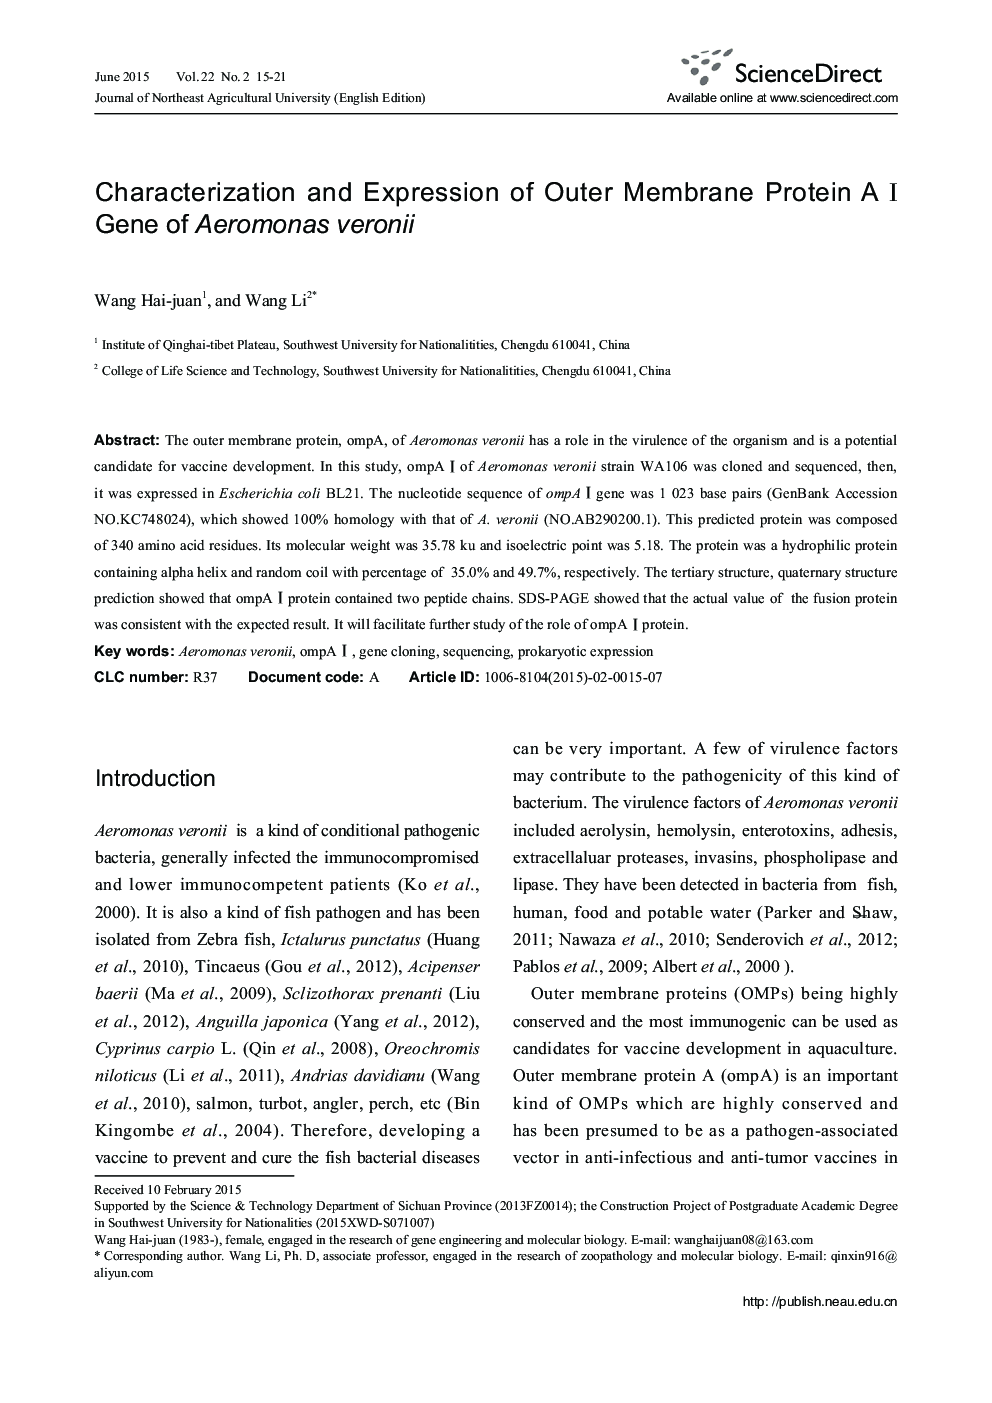 Characterization and Expression of Outer Membrane Protein A I Gene of Aeromonas veronii 